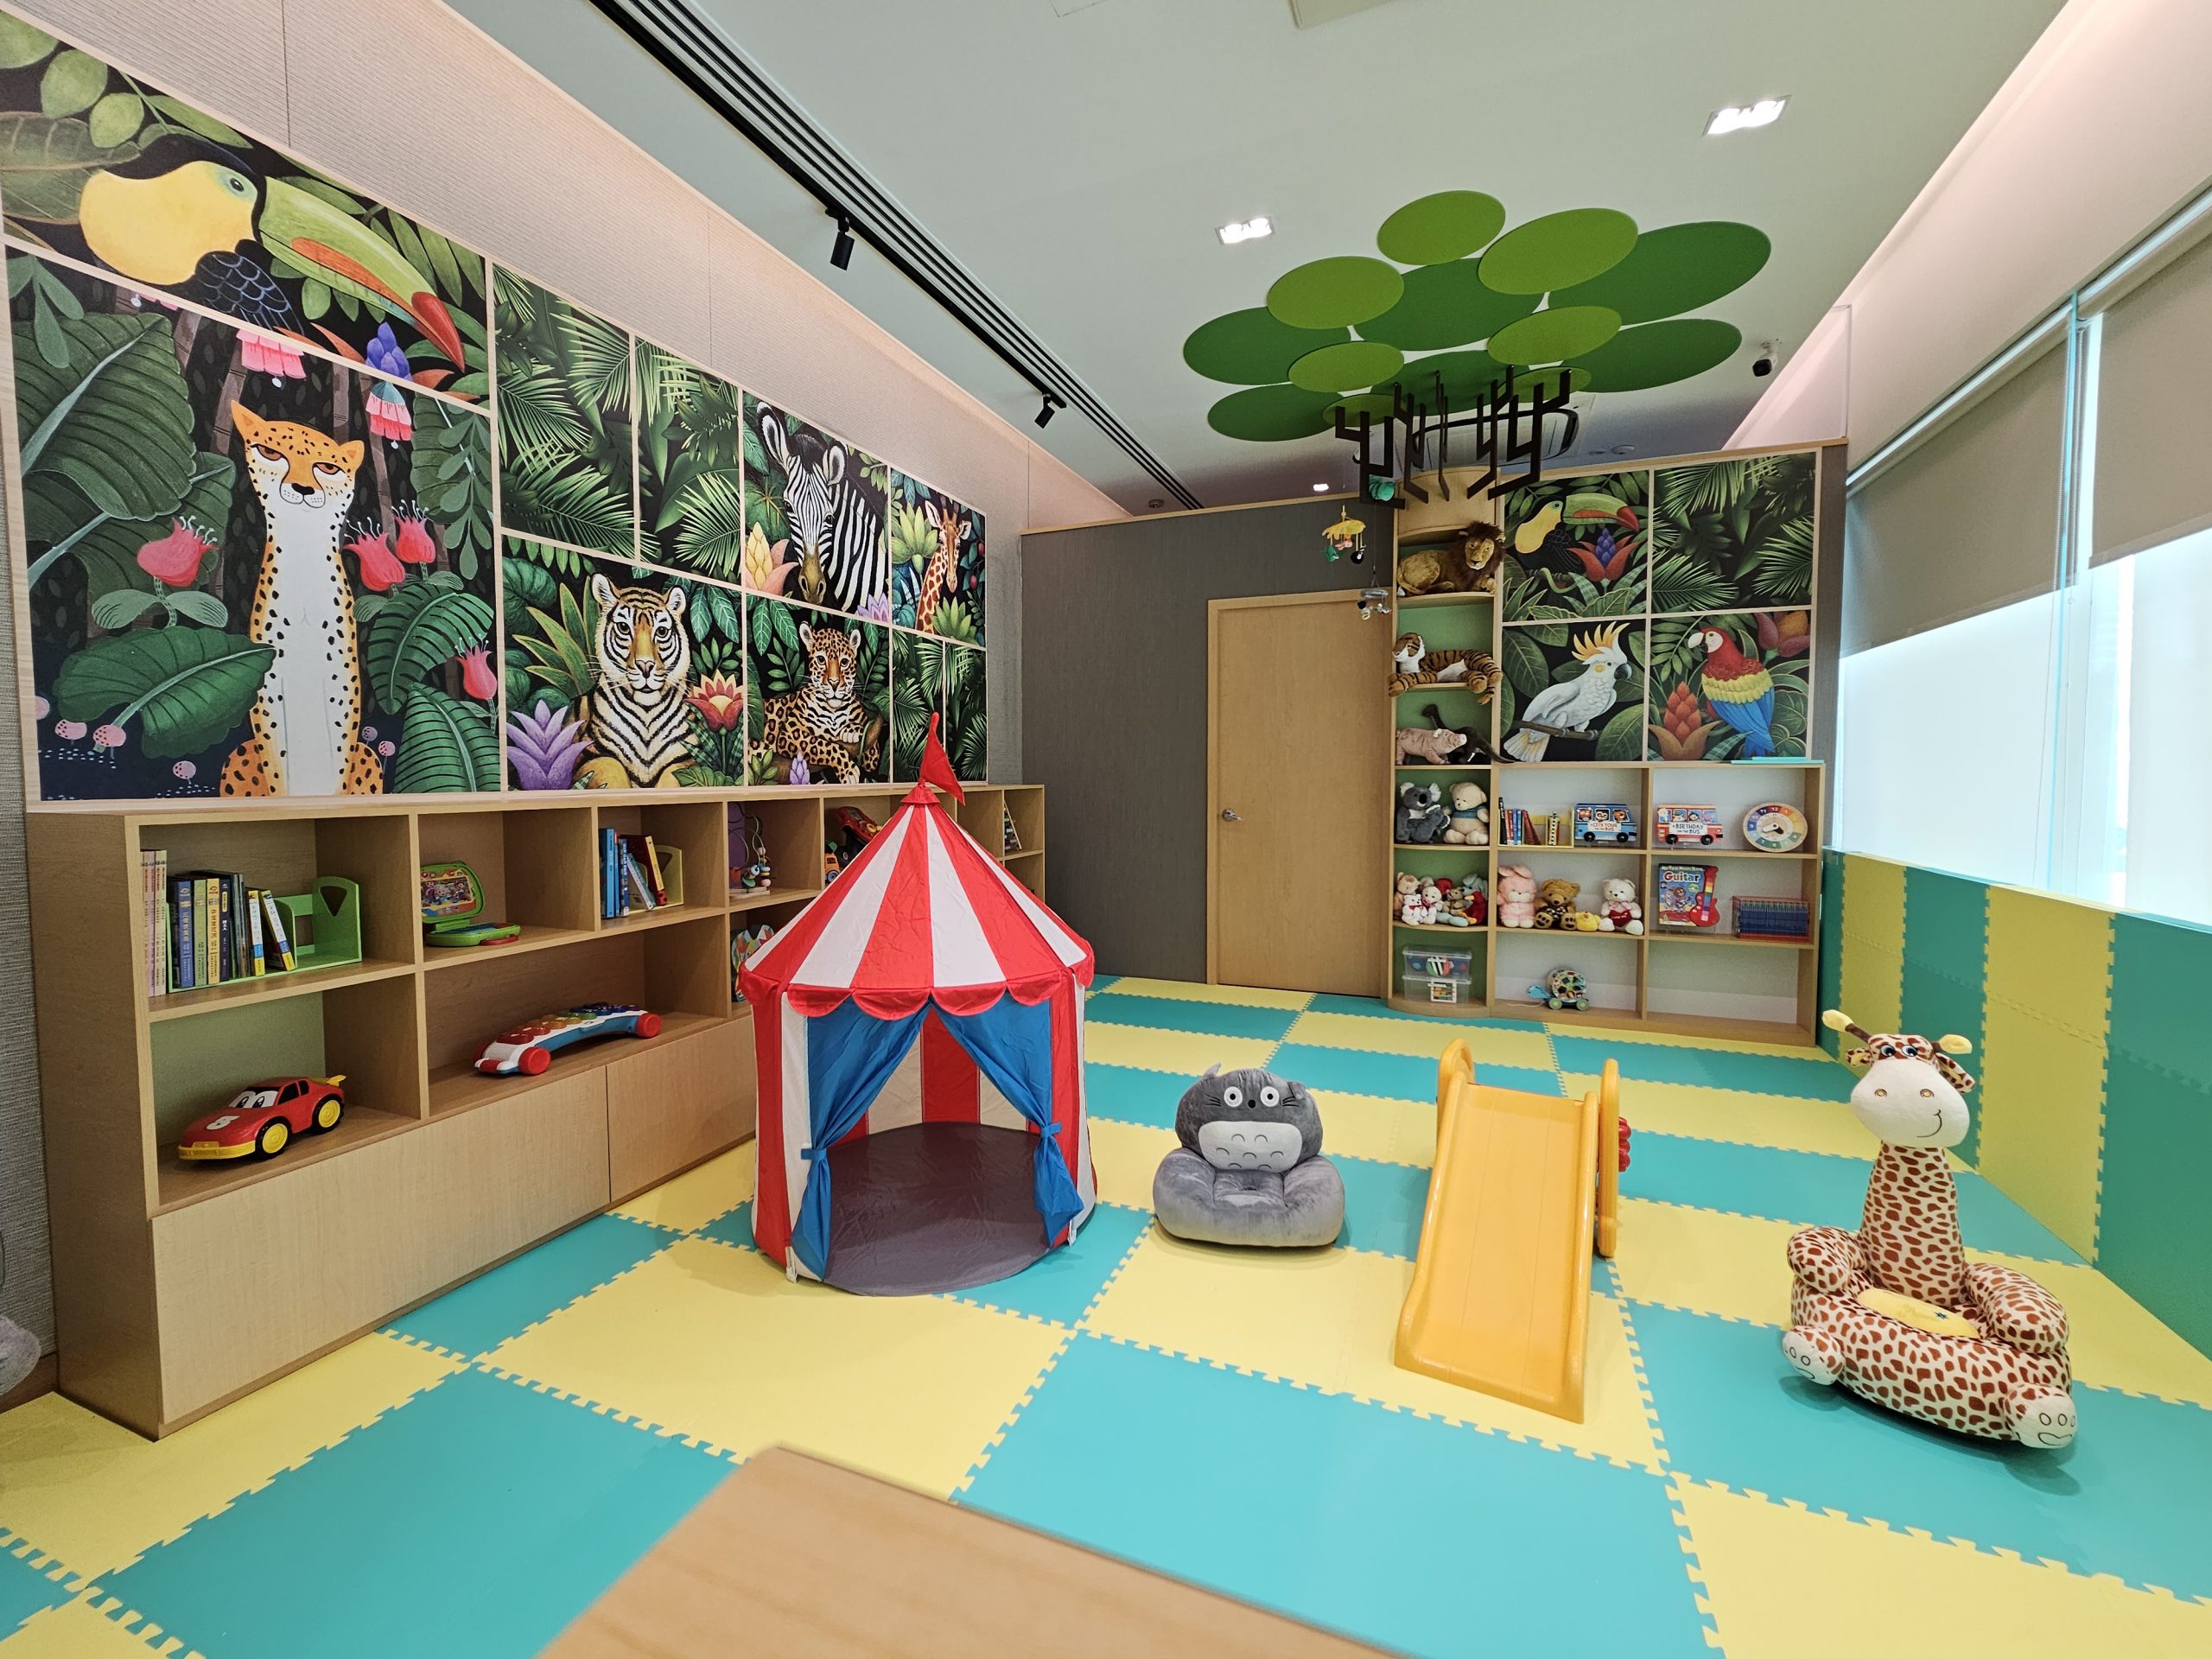 LE 乐 PLAYROOM – Chinese Swimming Club